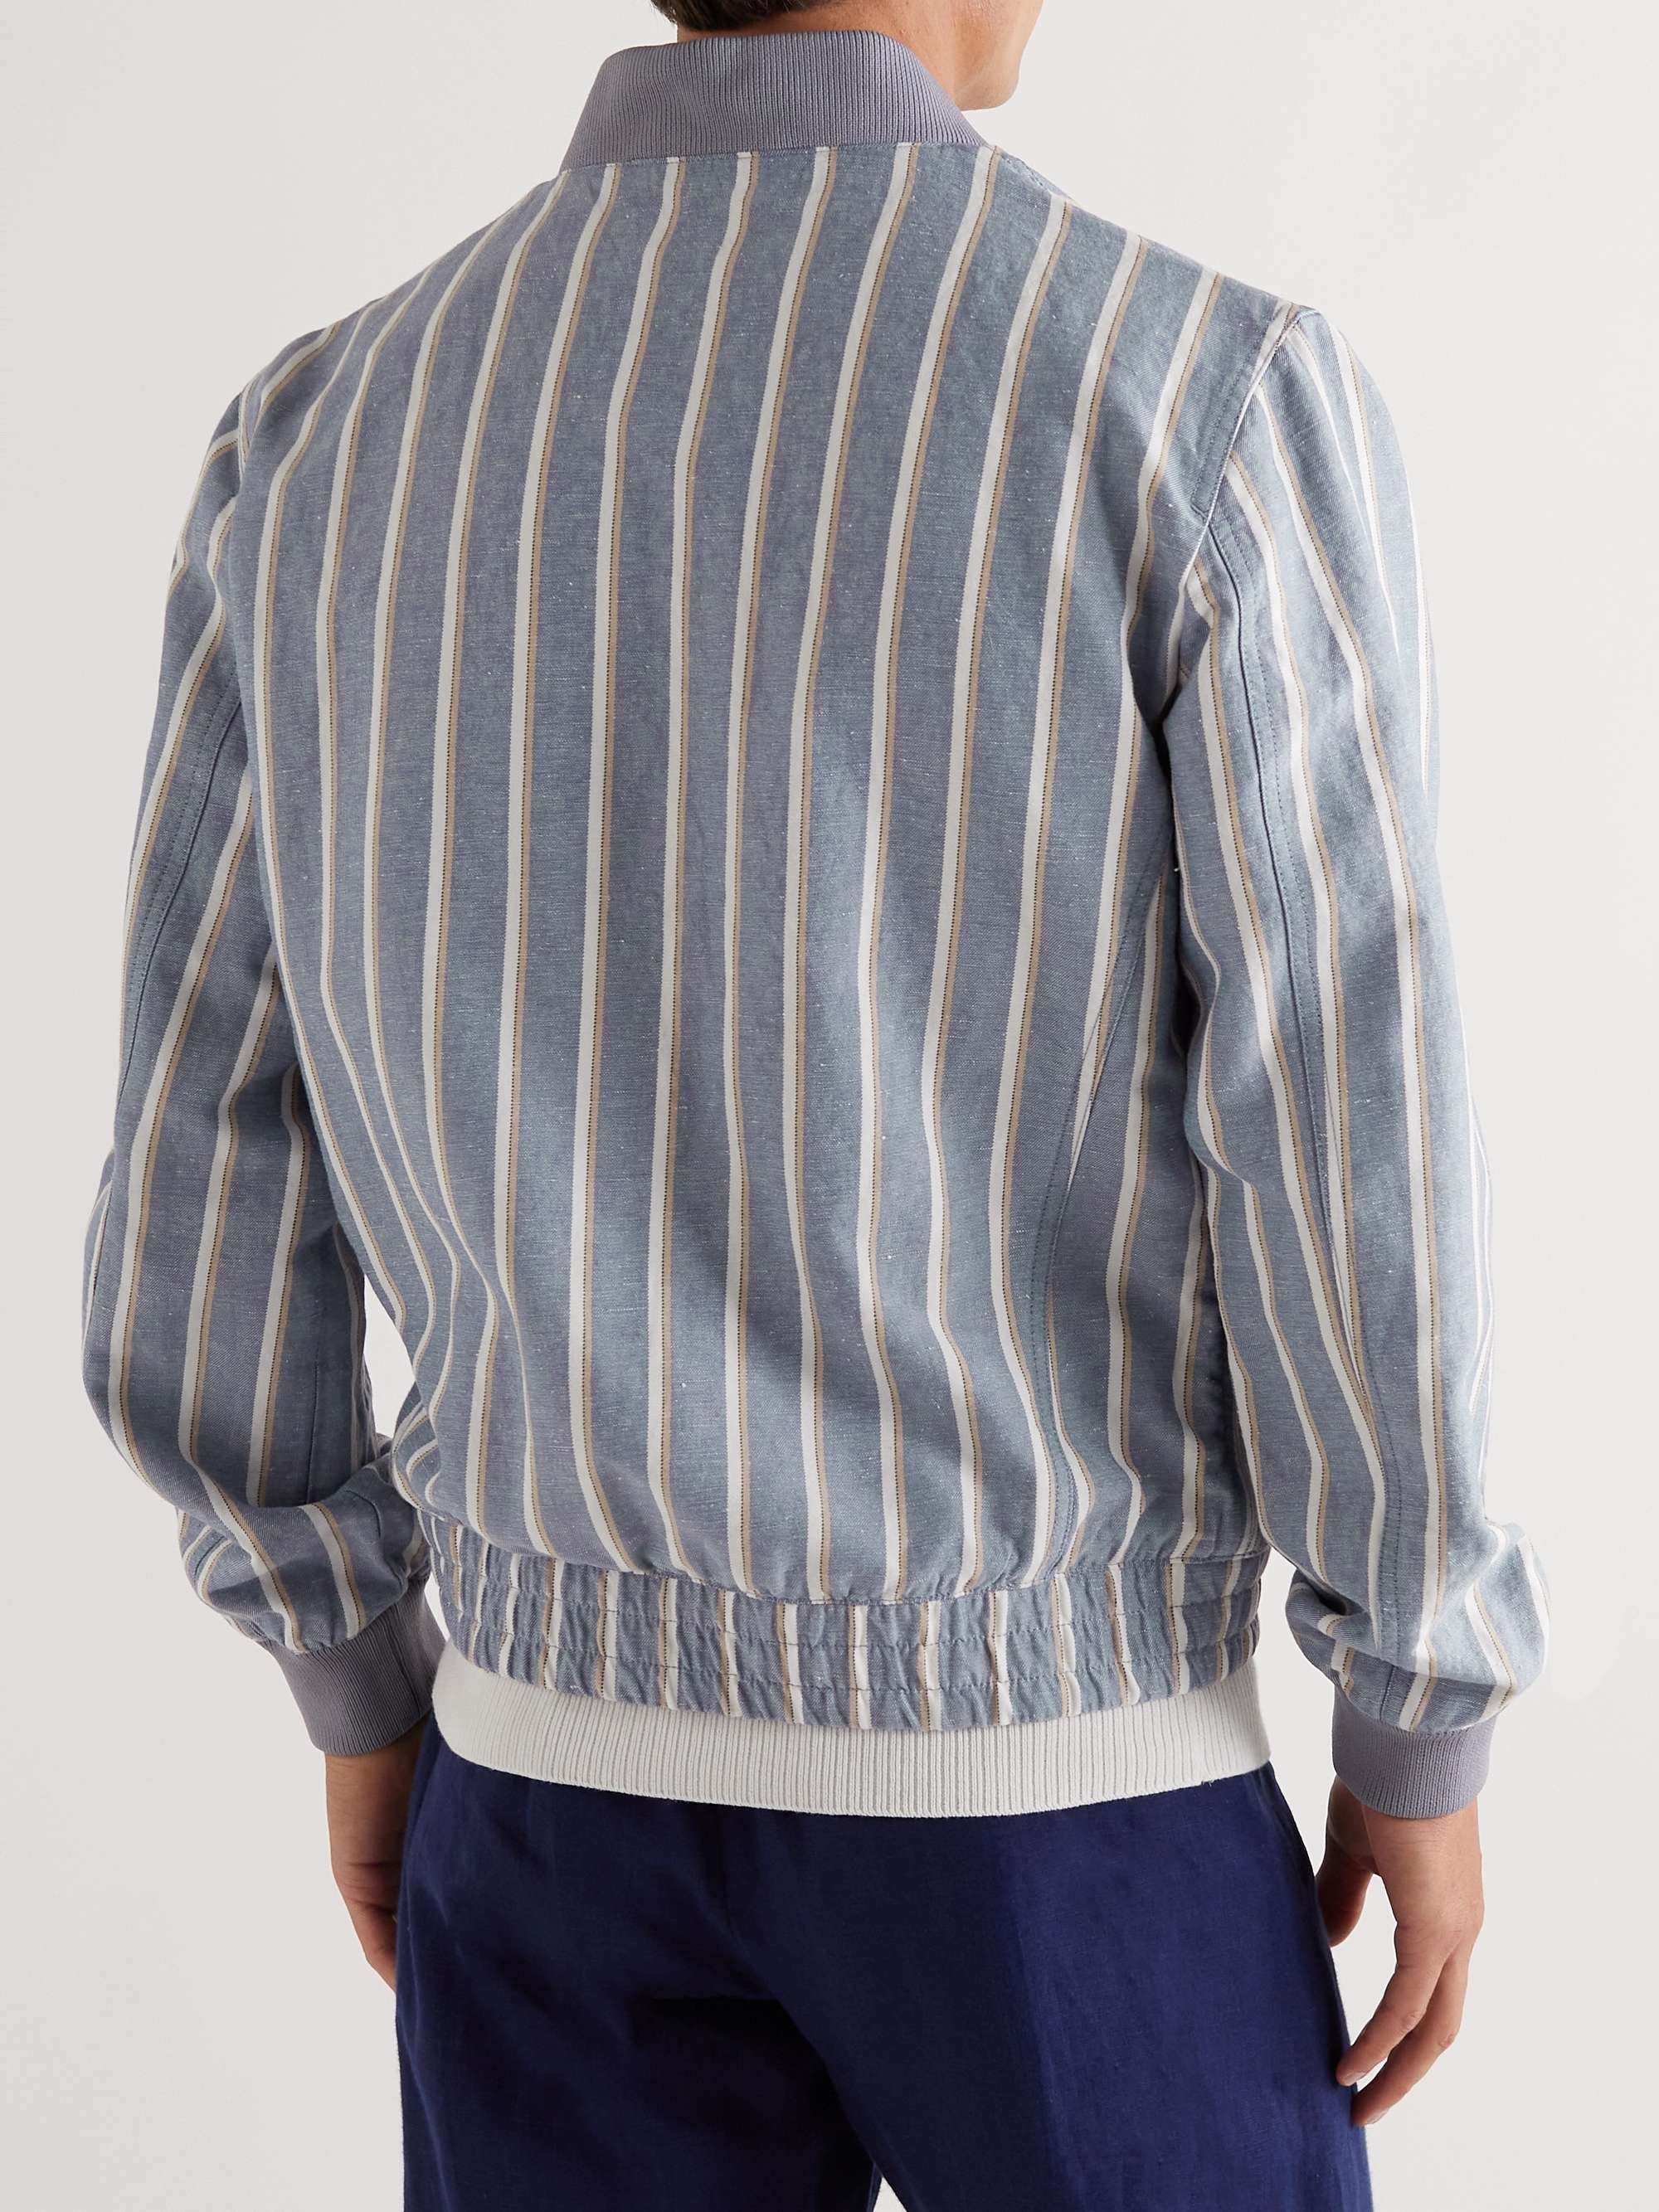 MR P. Striped Cotton and Linen-Blend Bomber Jacket